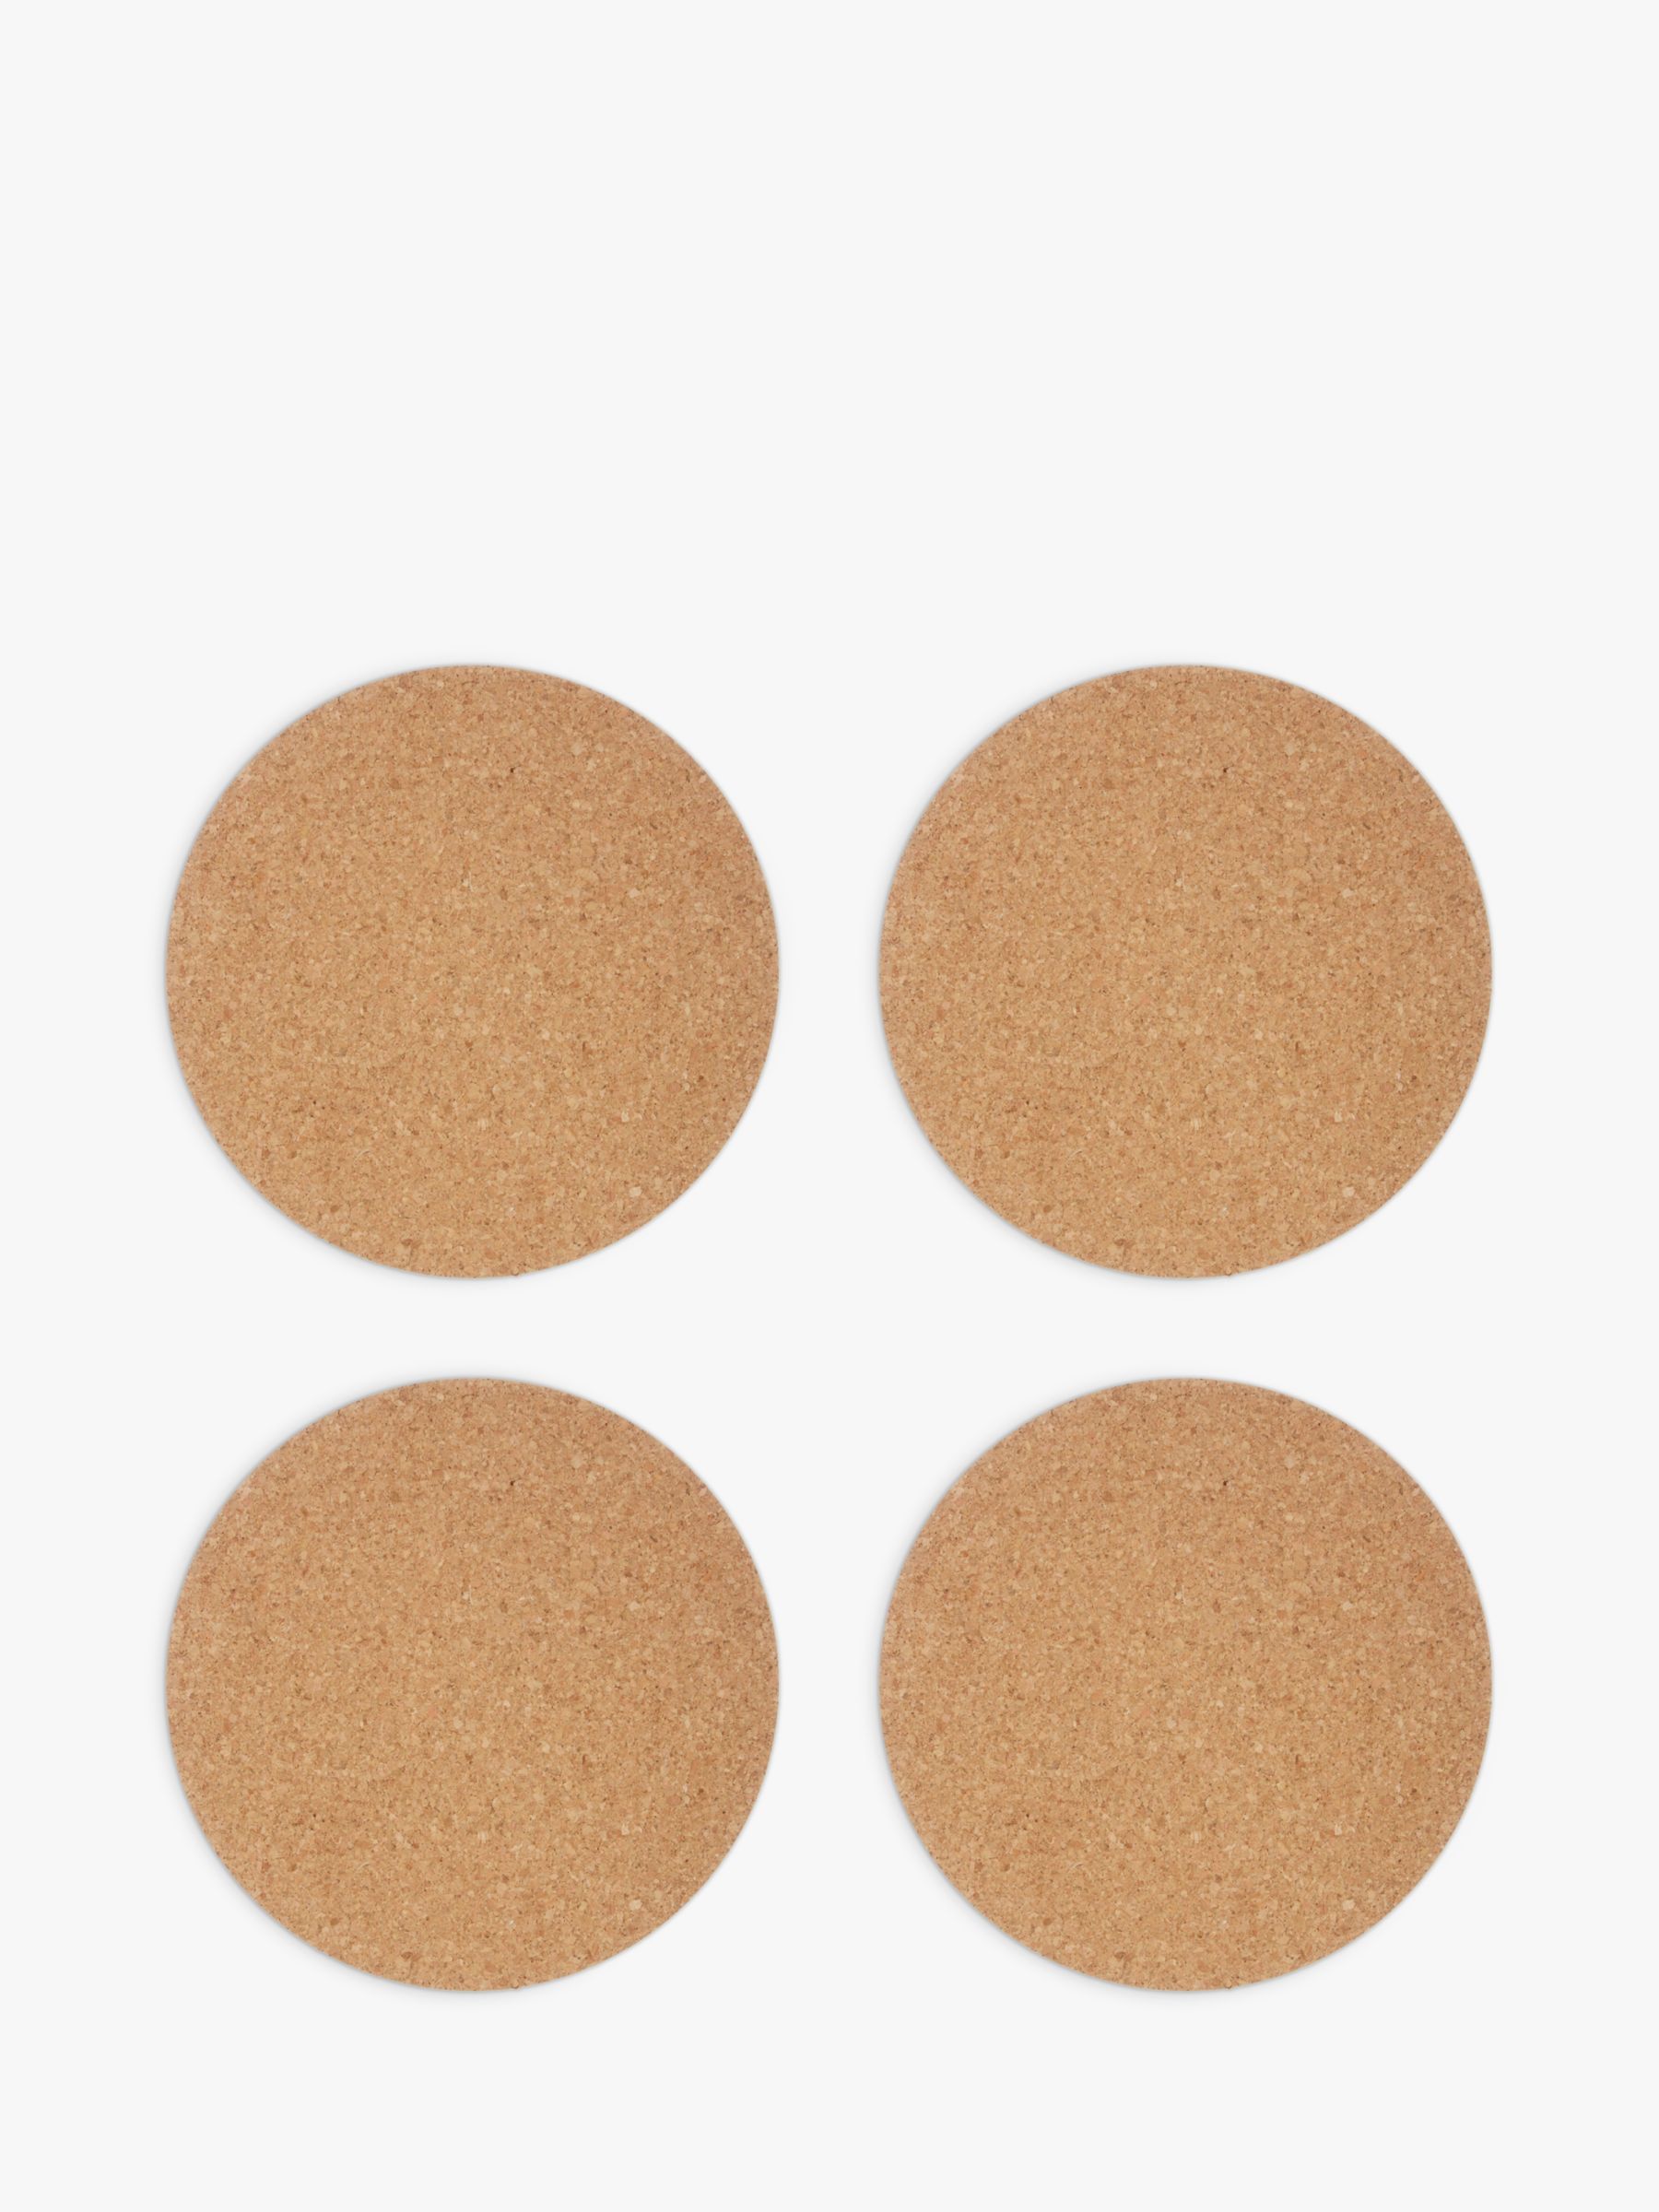 House by John Lewis Round Cork Placemats, Set of 4